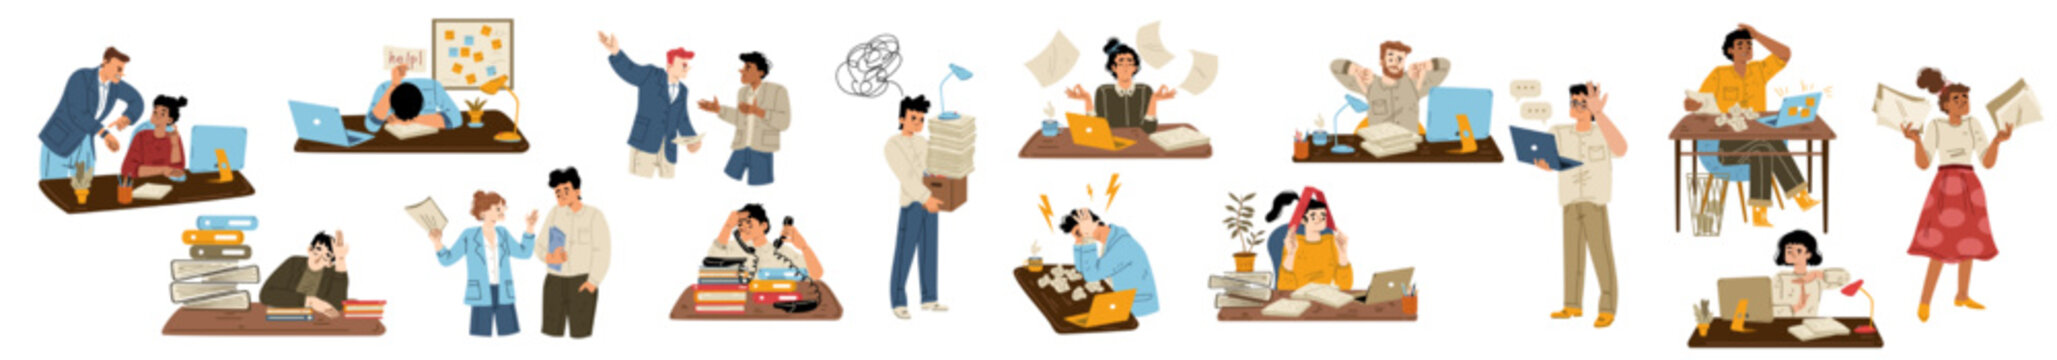 Set of annoyed people at work flat vector illustration on white. Scenes with office employees tired of stressful job, colleagues having conflict, angry boss yelling, man fired, woman suffering burnout